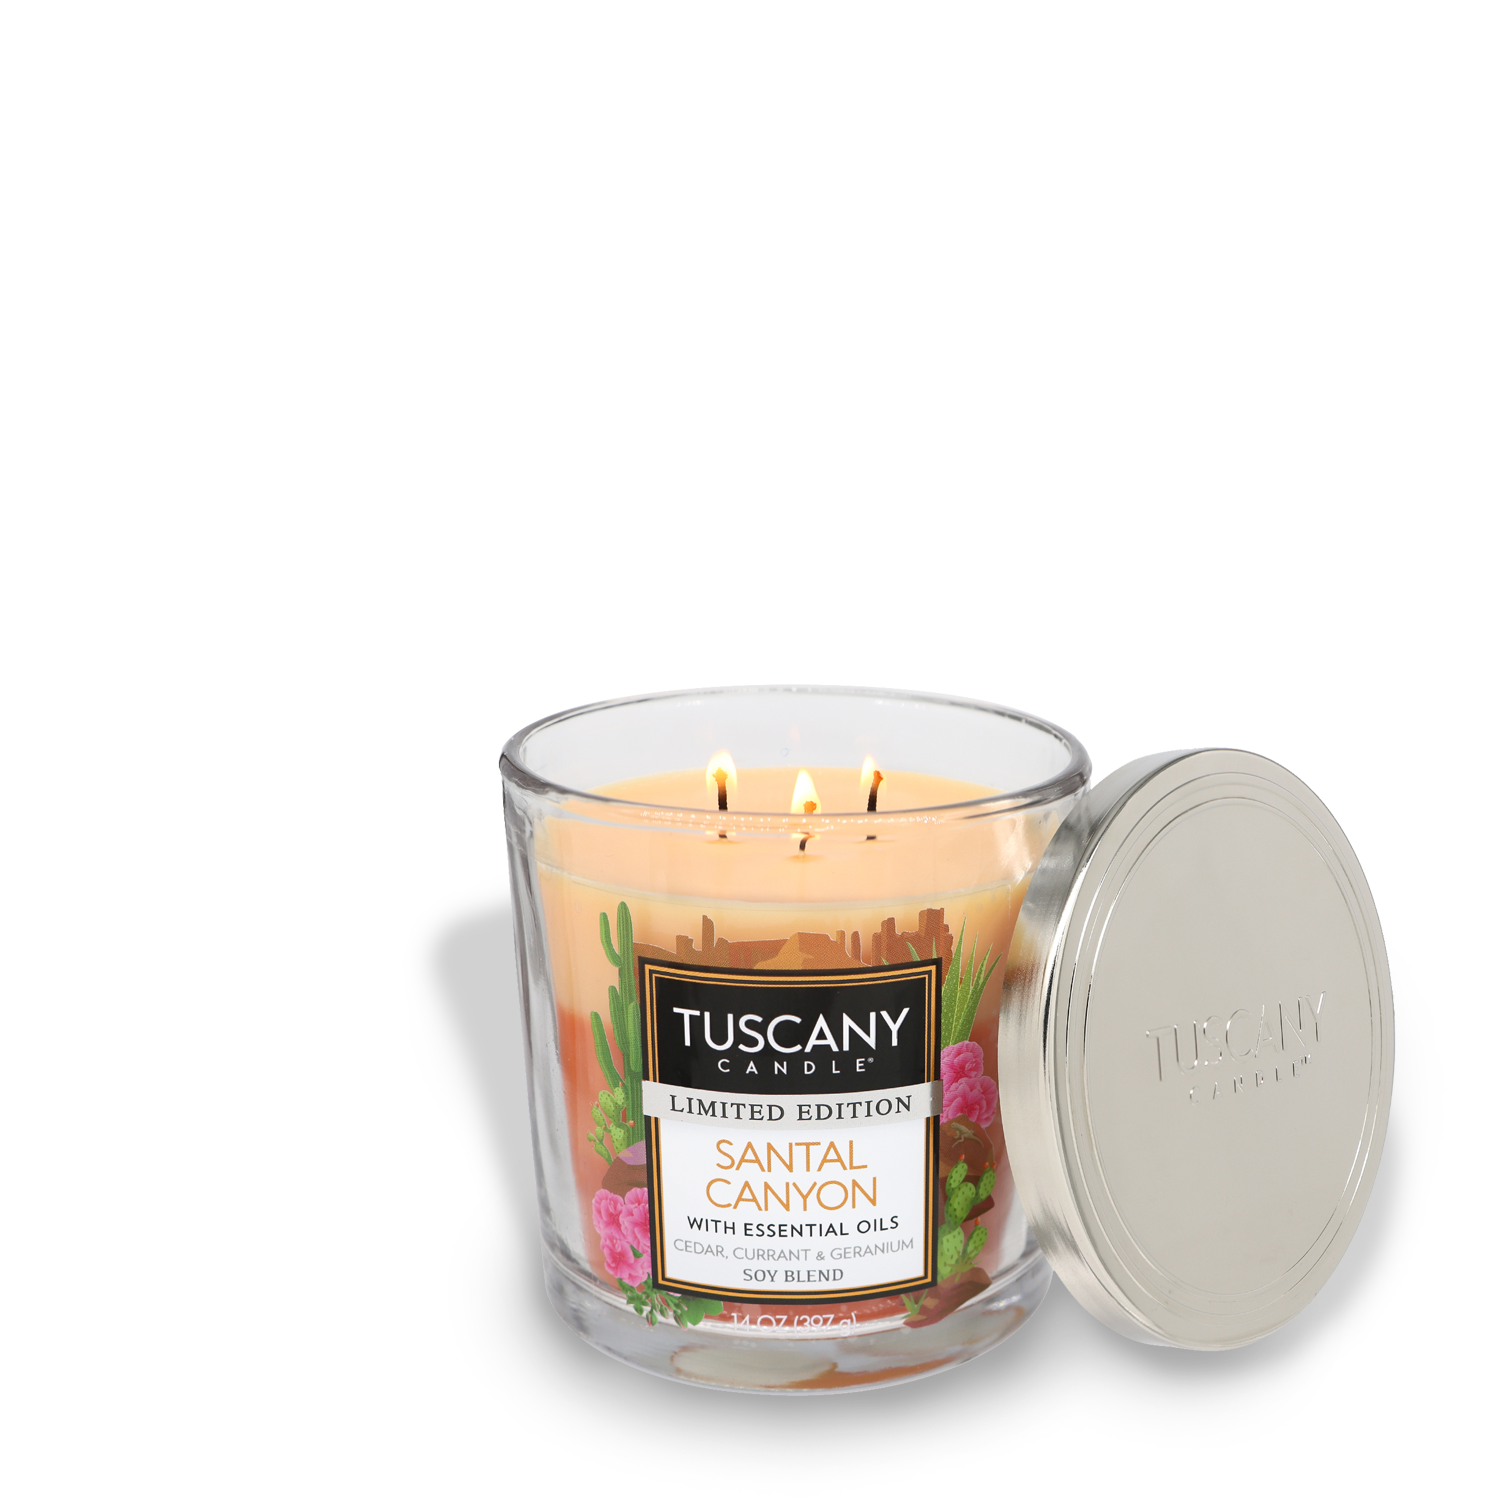 Three-wick Santal Canyon Long-Lasting Scented Jar Candle (14 oz) burning with lid off to the side. Brand Name: Tuscany Candle® SEASONAL